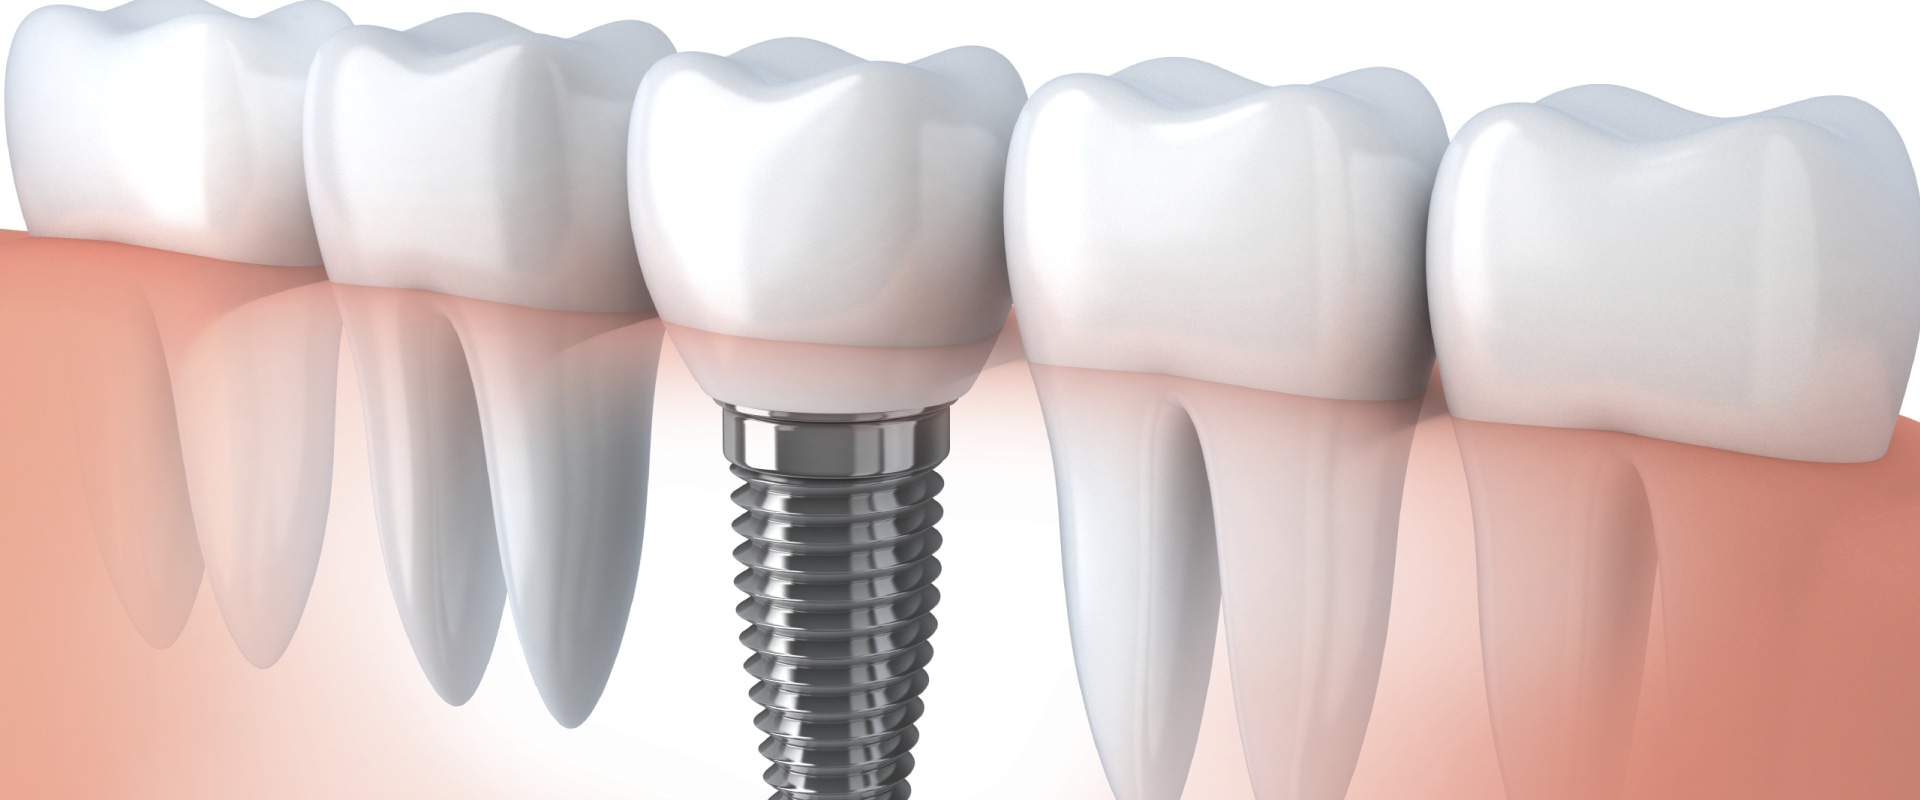 How dental implants are made?